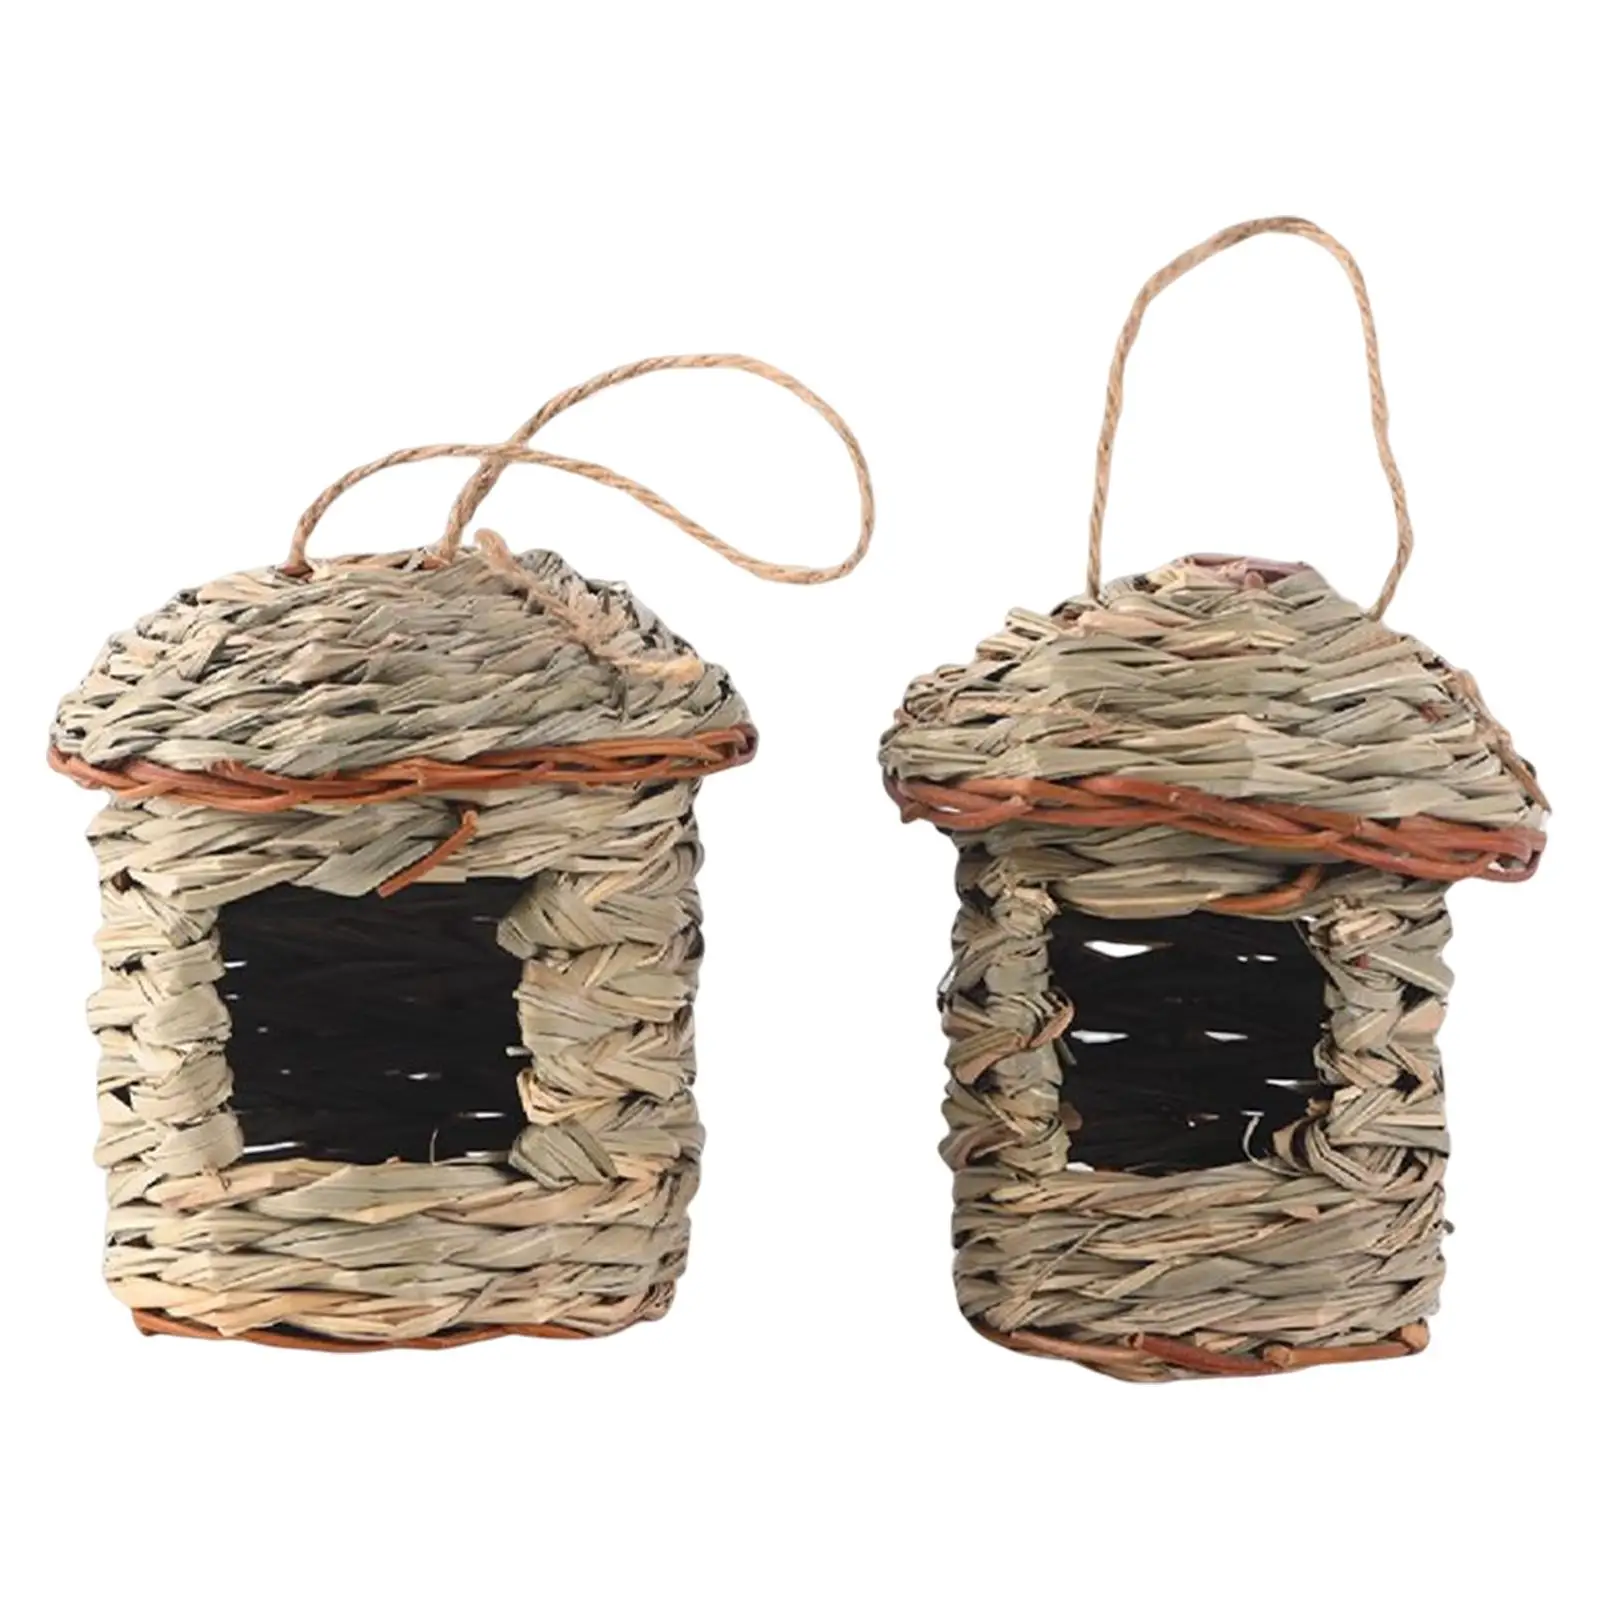 Hand Woven Natural Grass Hung Straw Nest Sturdy Cozy Bird Toy Bird Nest for Window Outside Lawn Charming Decorative